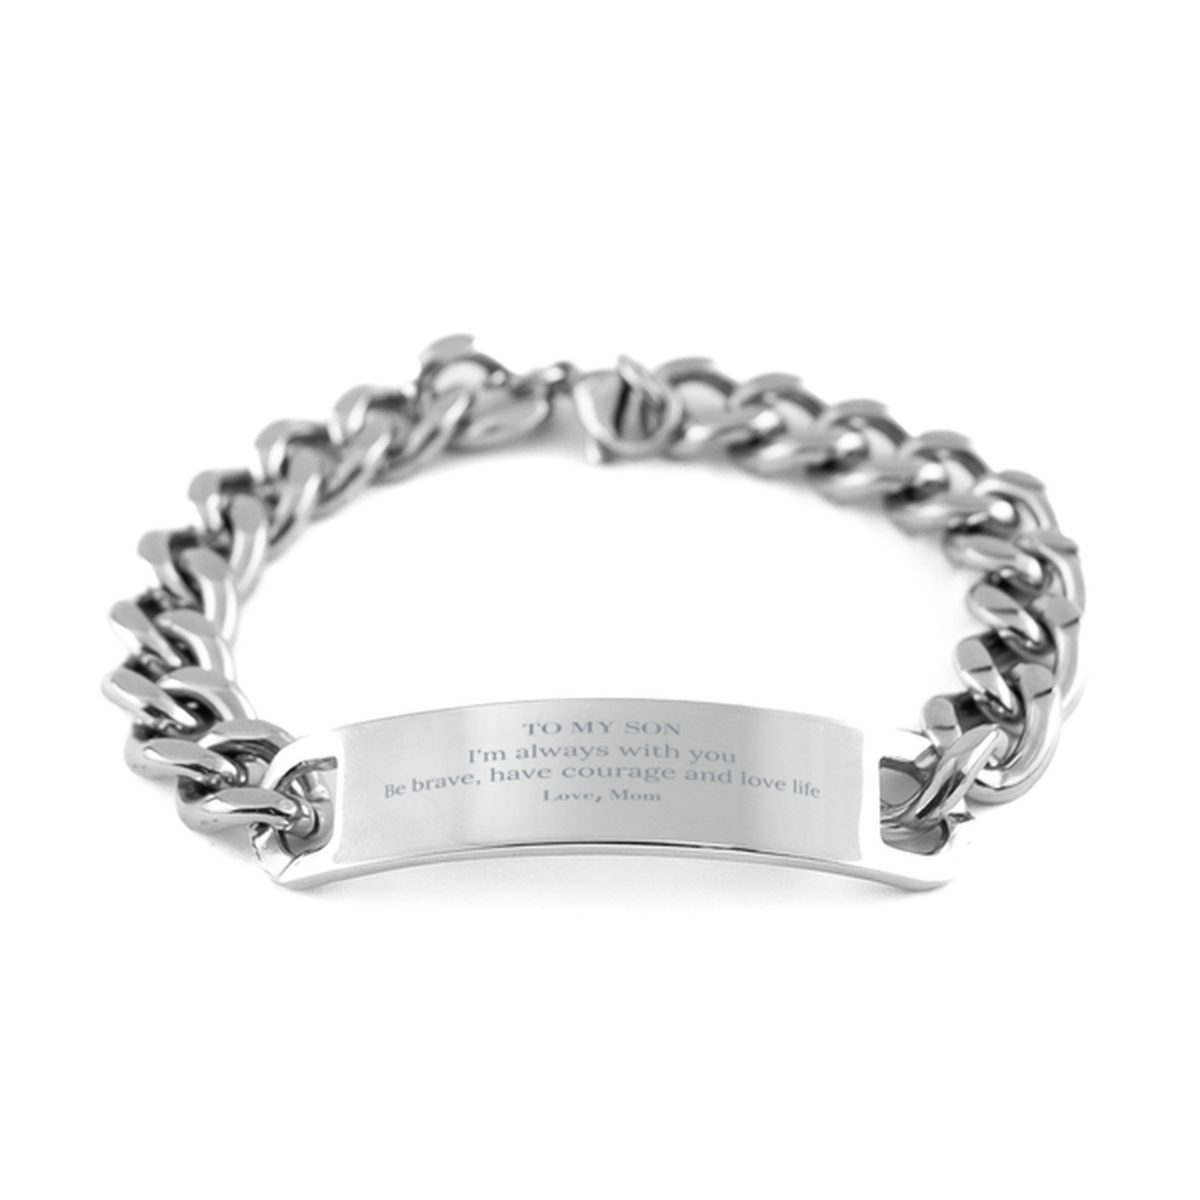 To My Son Gifts from Mom, Unique Cuban Chain Stainless Steel Bracelet Inspirational Christmas Birthday Graduation Gifts for Son I'm always with you. Be brave, have courage and love life. Love, Mom